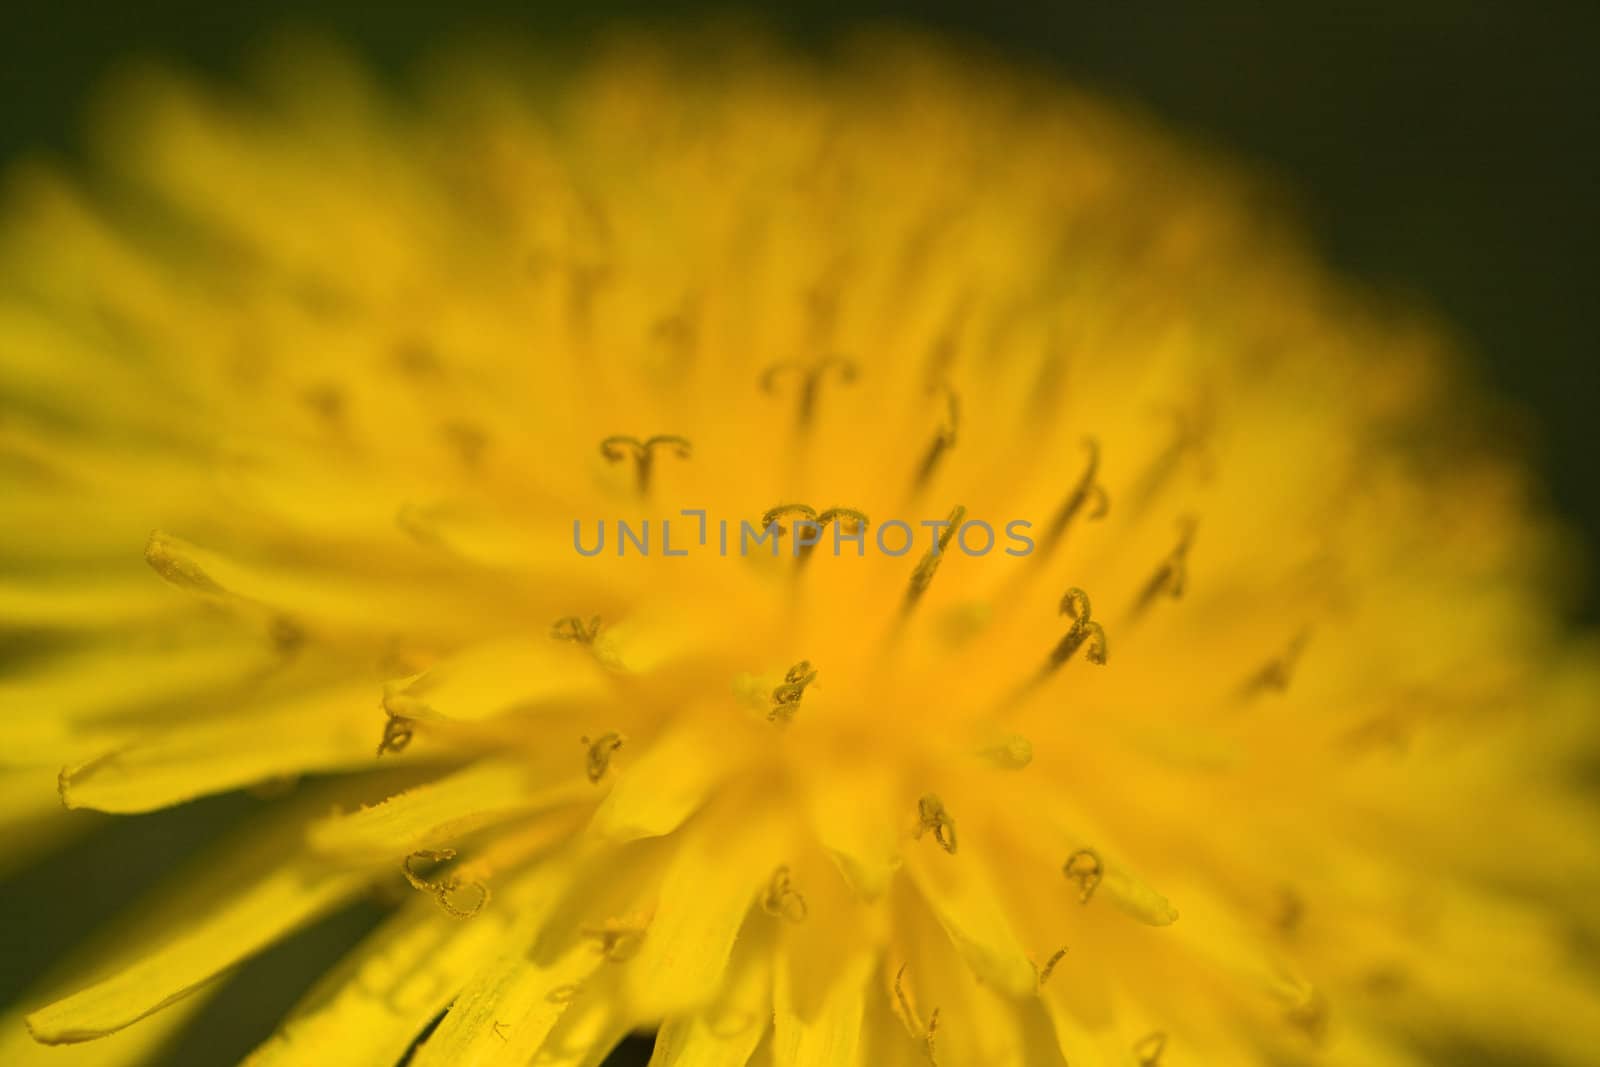 A close-up of a yellow dandelion